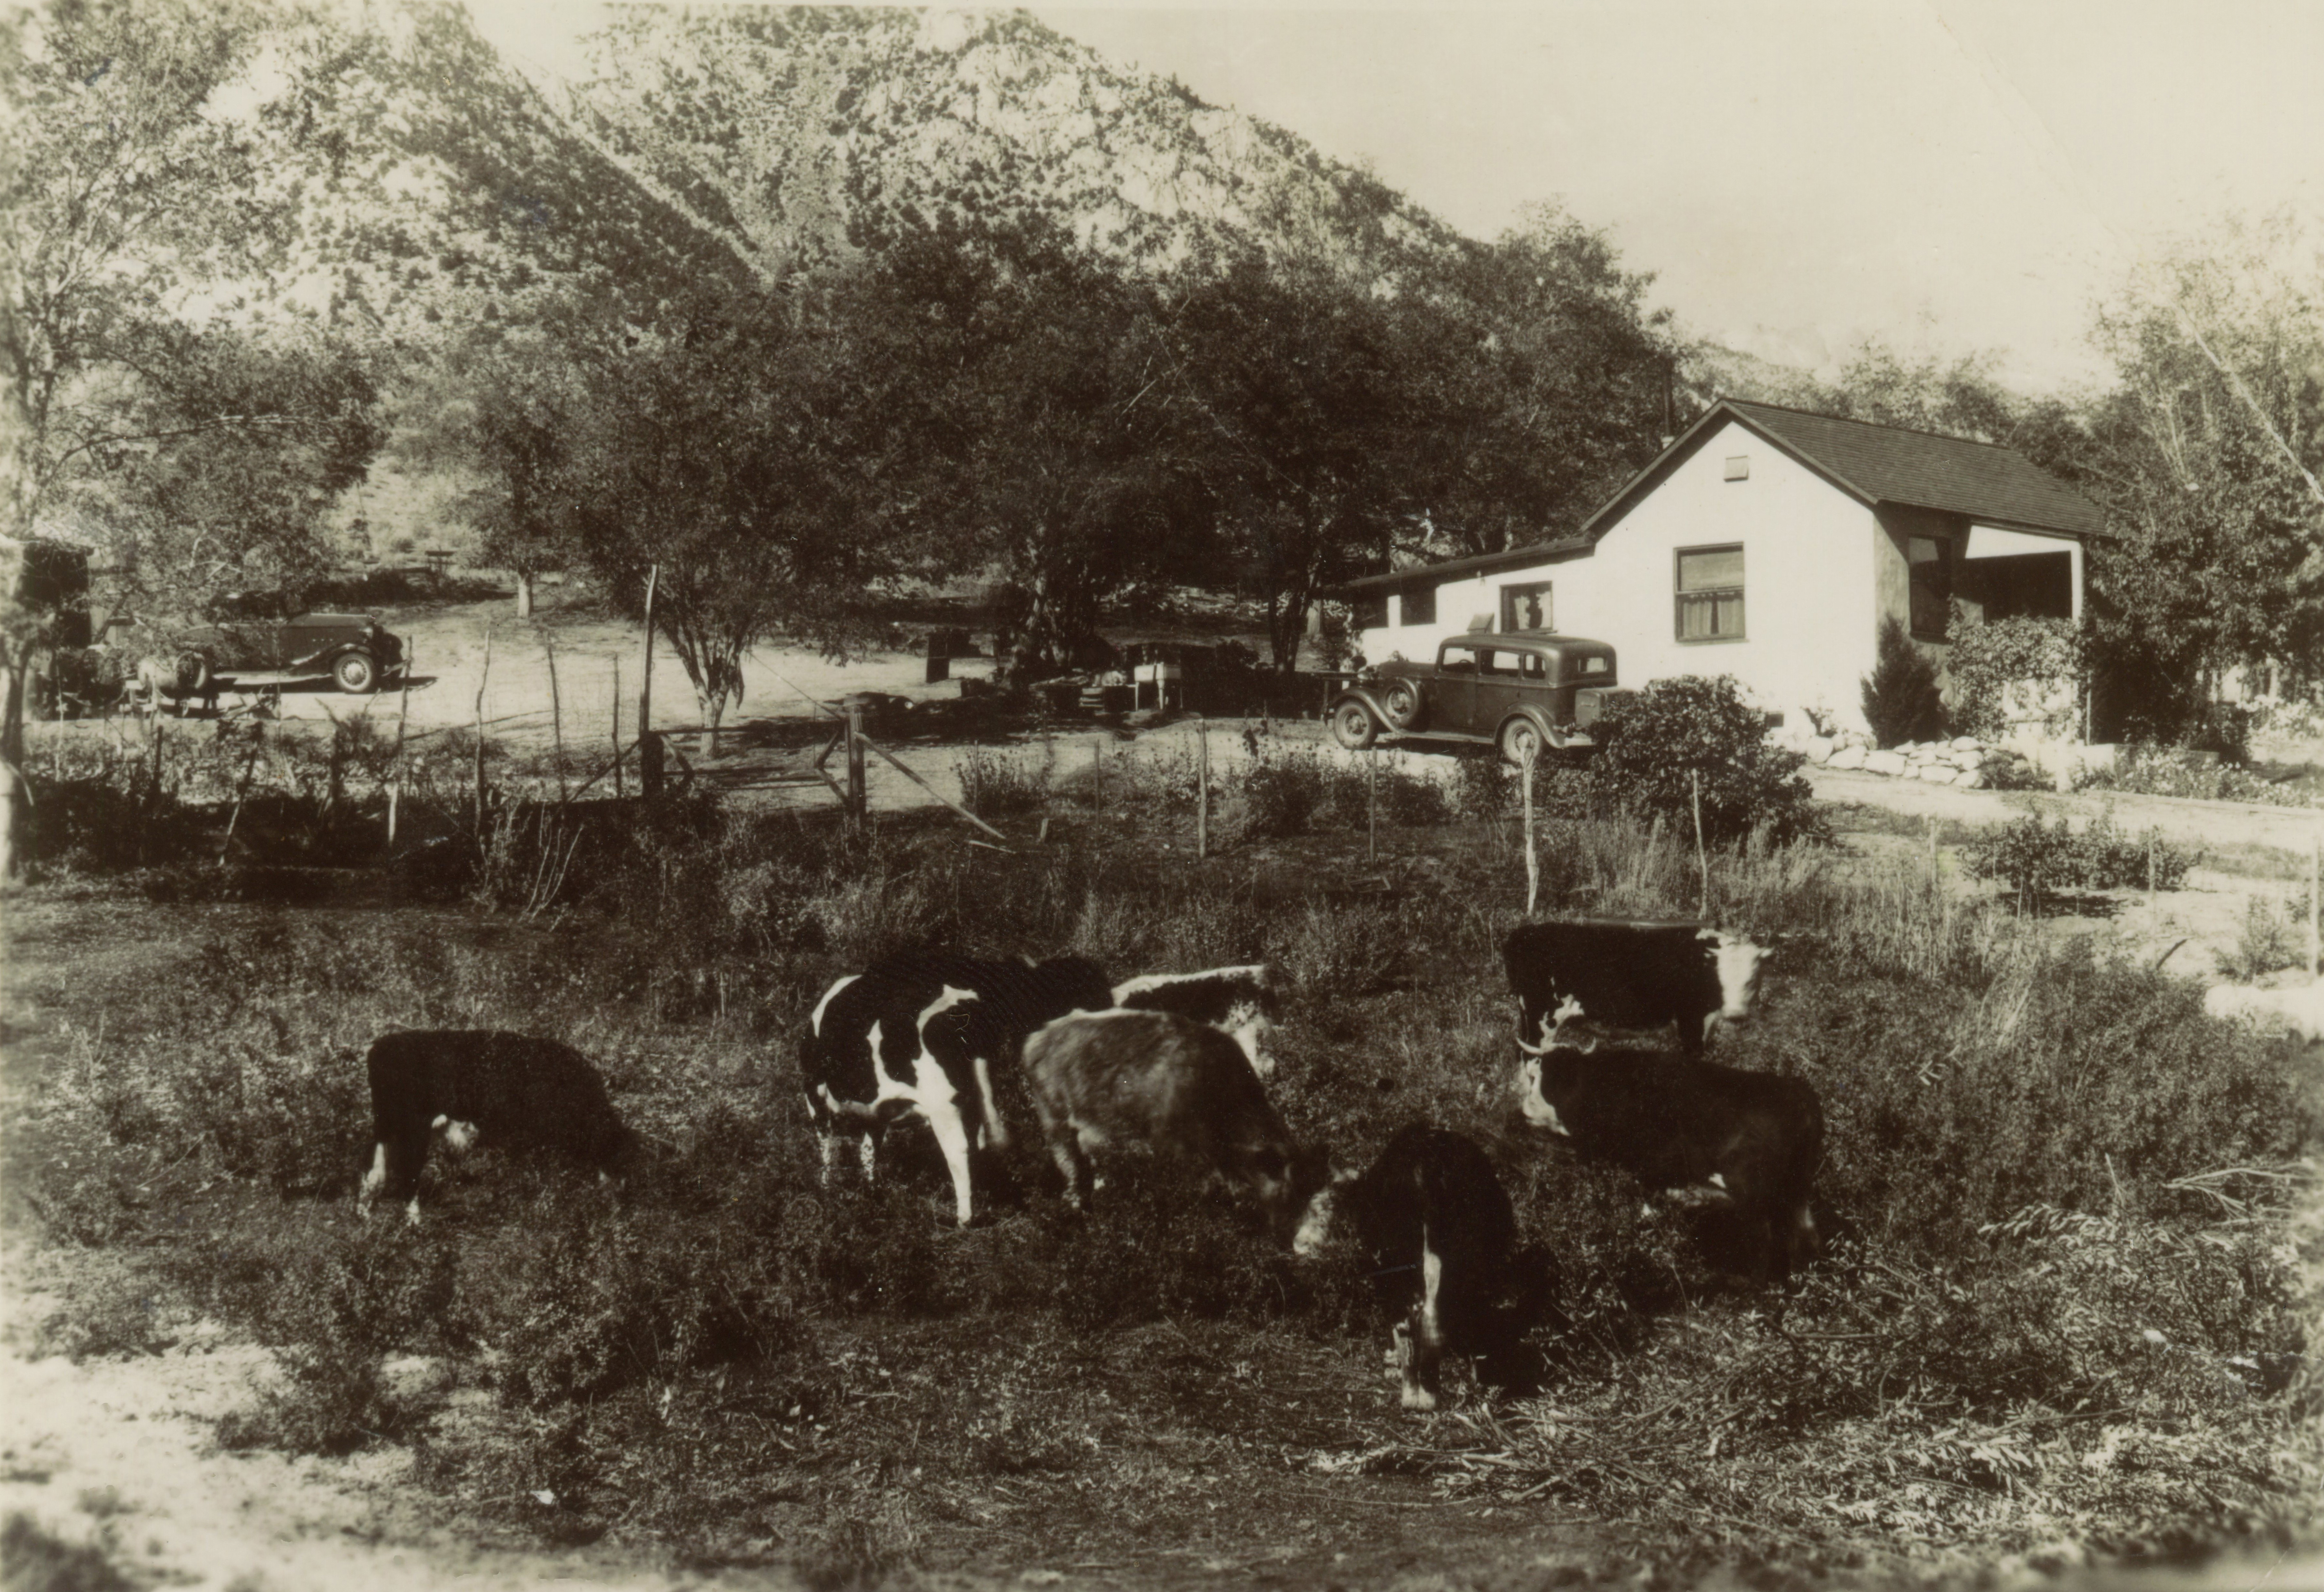 Ranch House c. 1930s